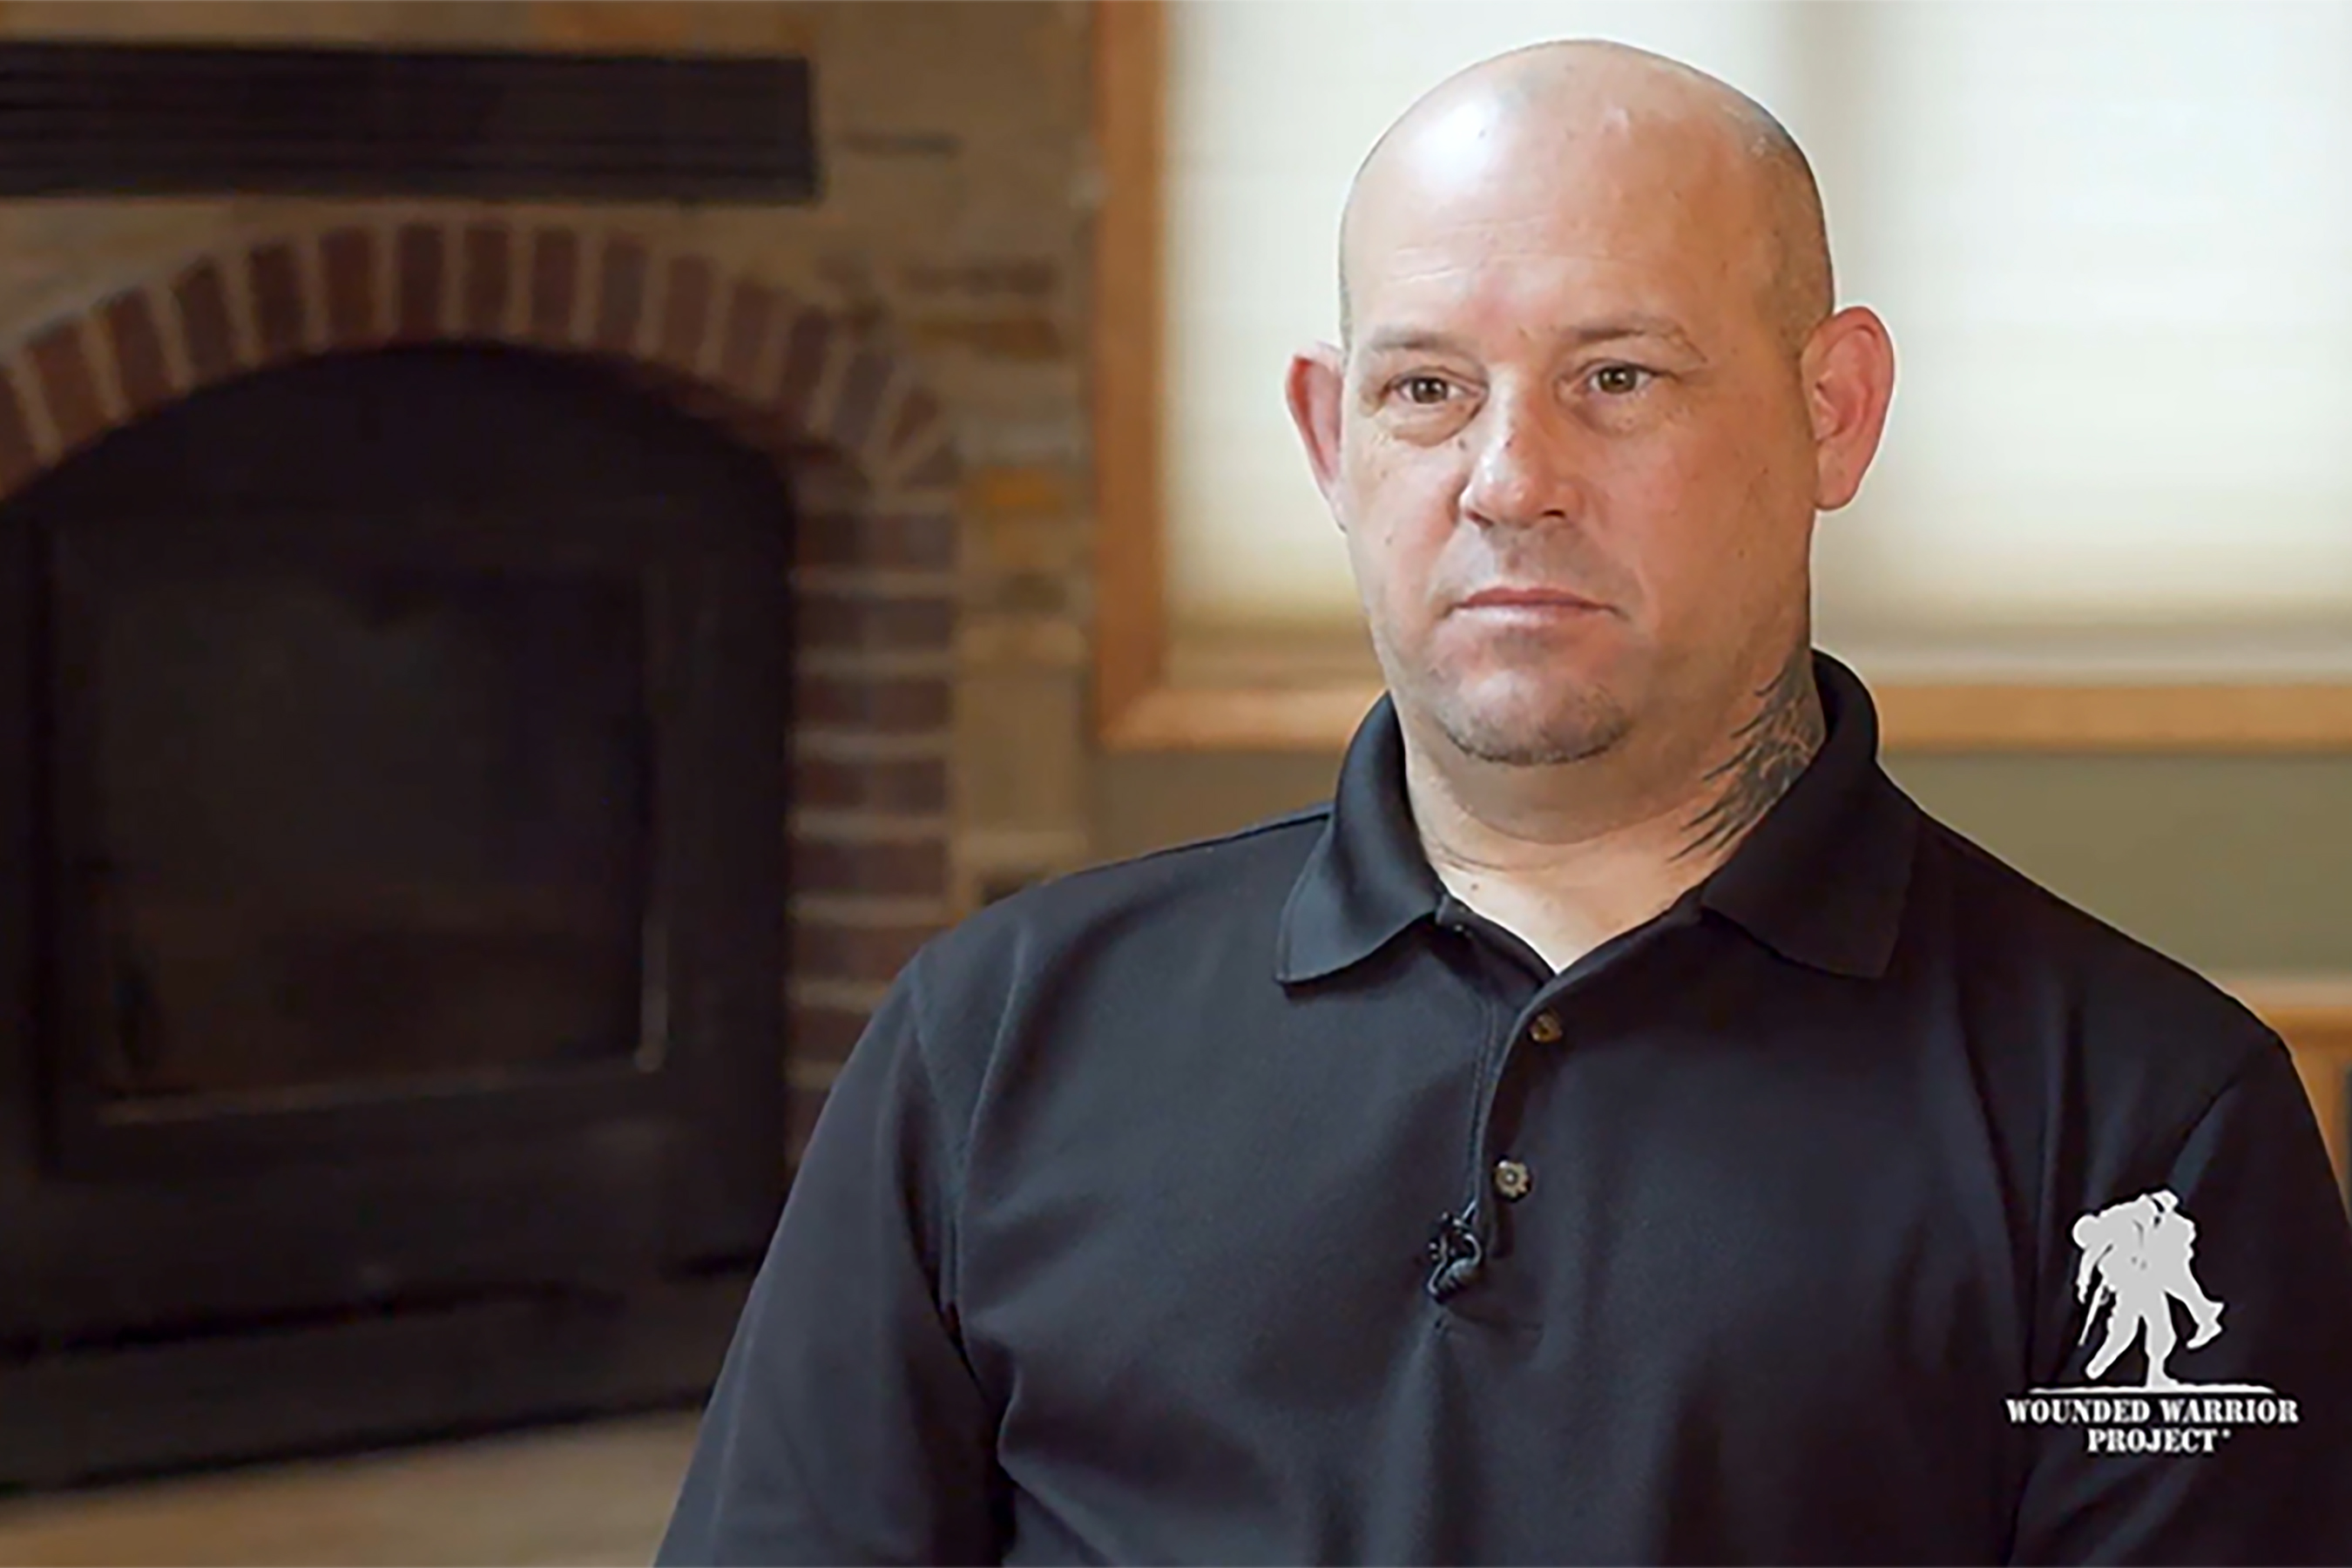 U.S. Marine vet Phil Krabbe survived a suicide attempt thanks to a friend from Wounded Warrior Project®. Financial struggles had contributed to his sense of helplessness. “The first year of my recovery was the hardest,” Phil says. “Getting off drugs was one aspect of what I was fighting. And then to have to worry about where my next meal was coming from or how I was going to put food on the table for the next week for my family was another aspect. There were times when I thought, ‘Why am I doing this?’" Phil stayed the course, and worked with the WWP Benefits Service team to get the proper VA disability rating. This created stability to focus on his recovery and participate in programs like Warrior Care Network®. “It changed my life drastically,” says Phil.